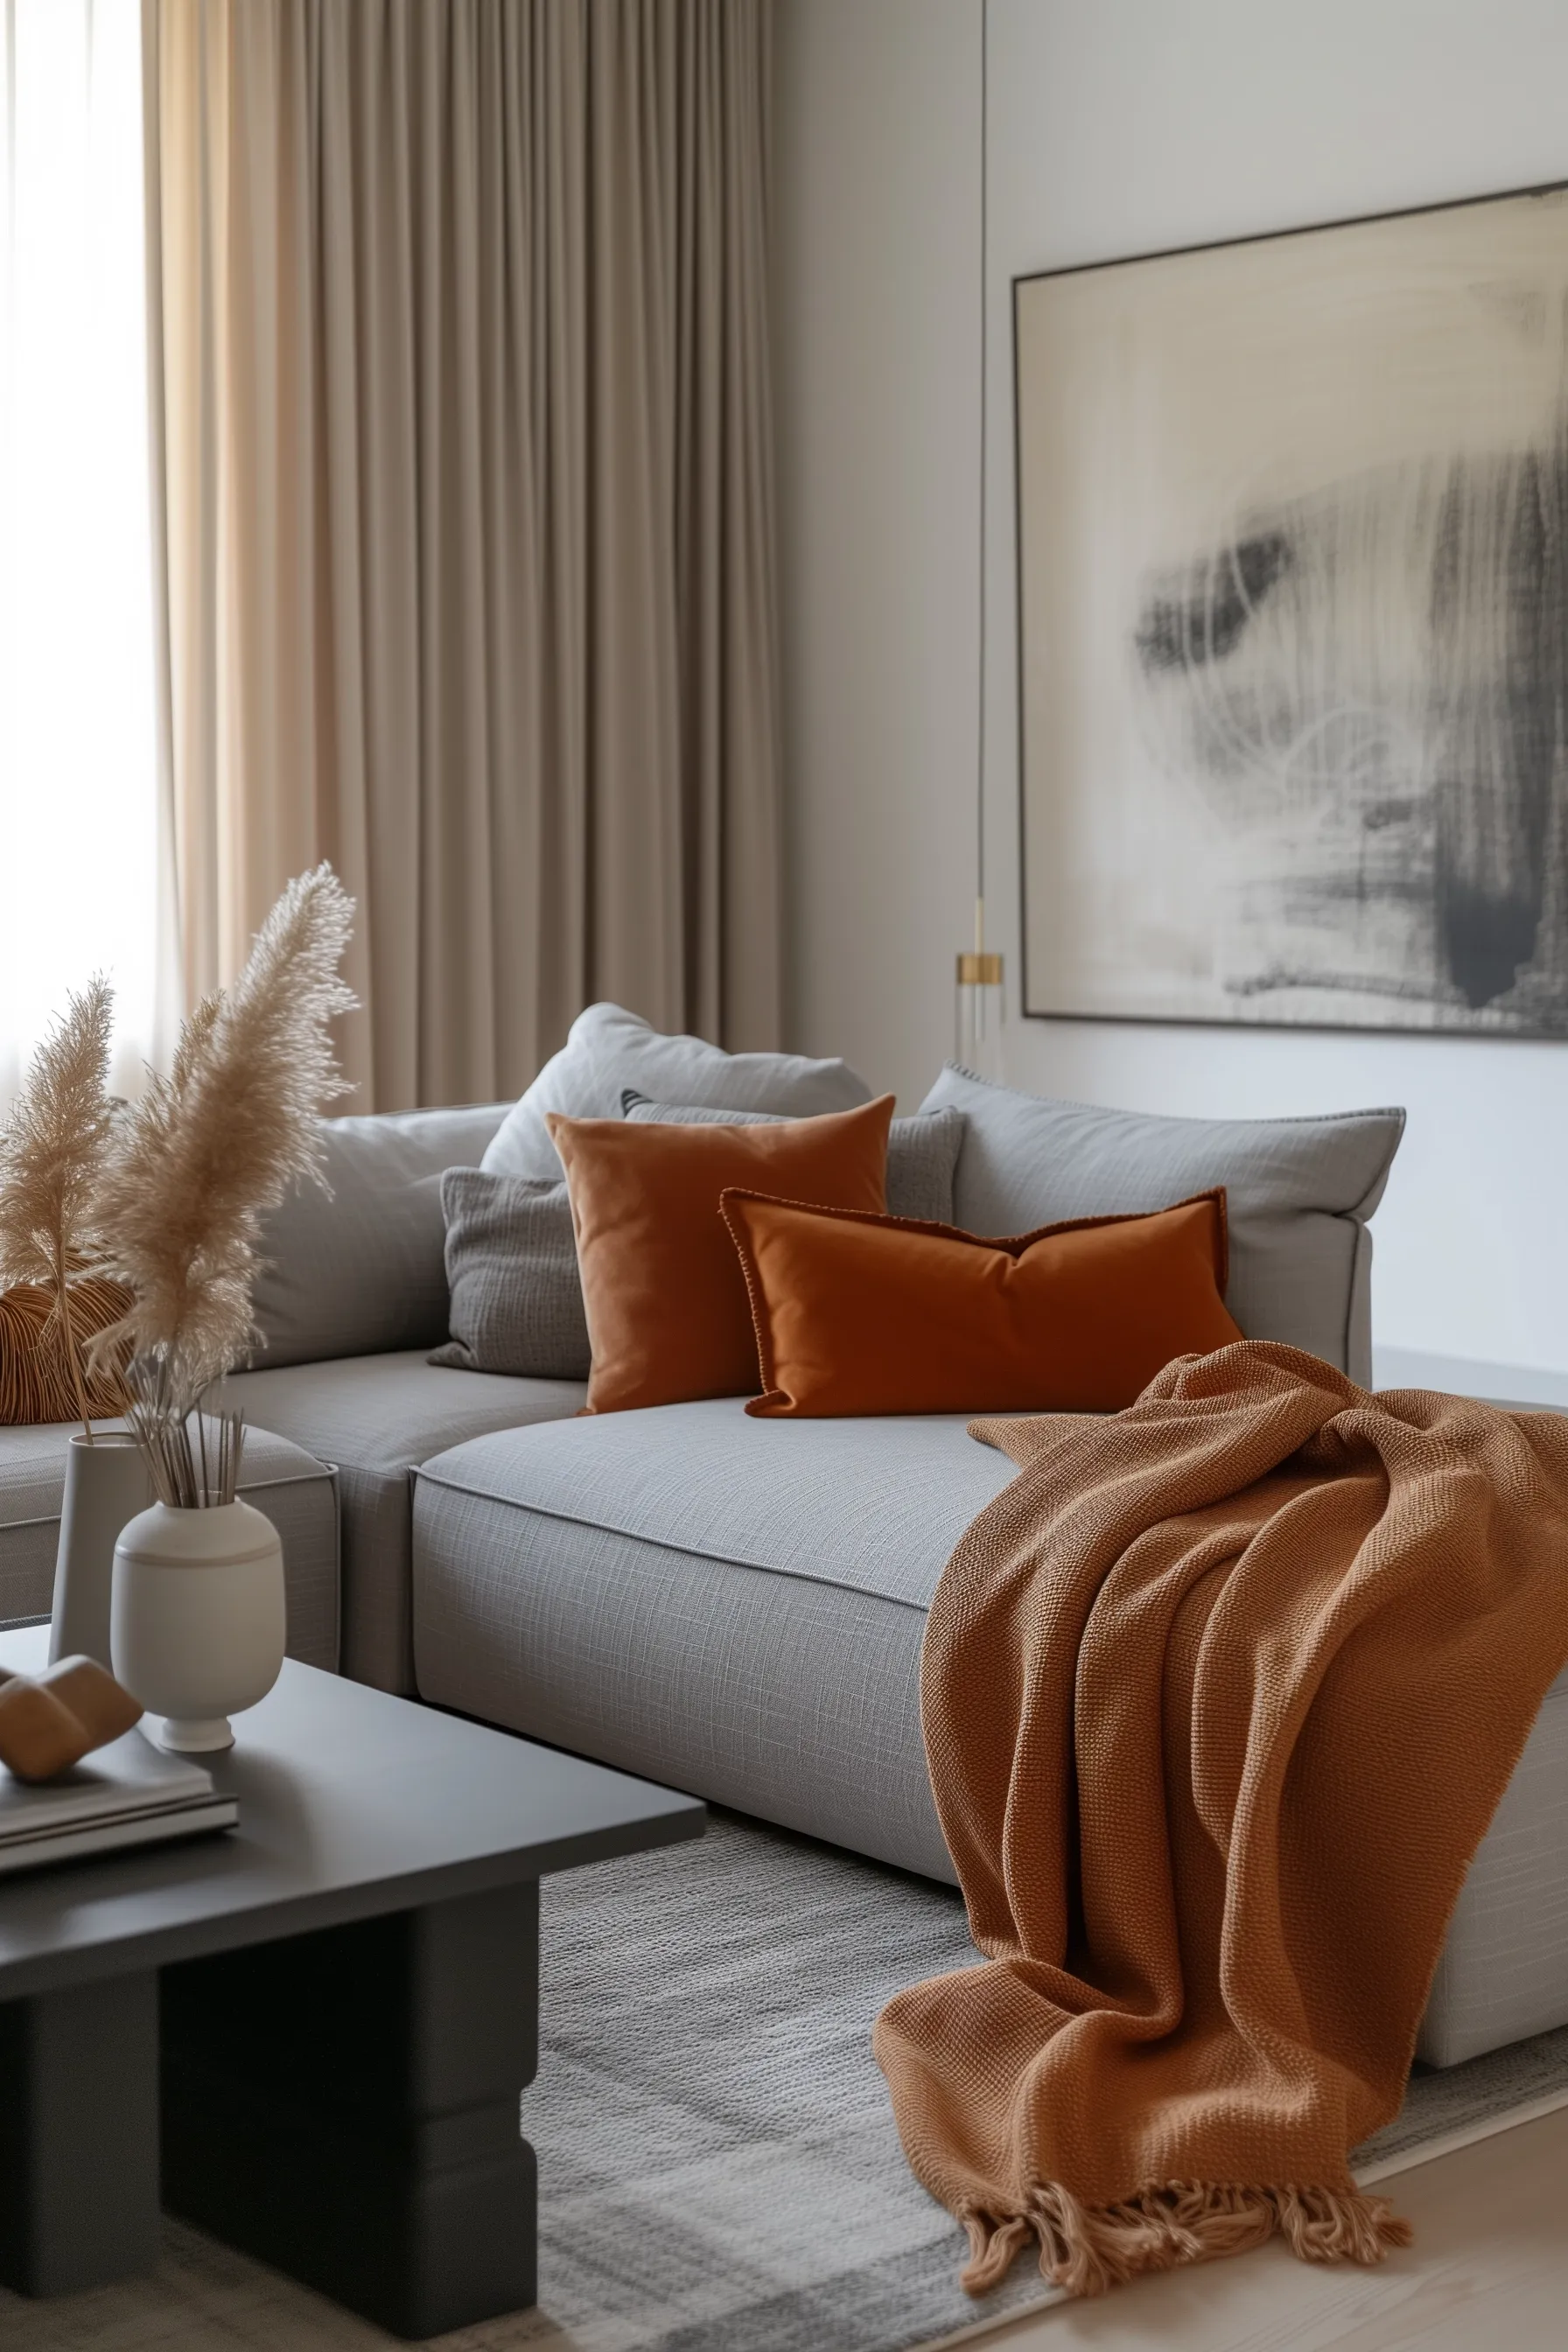 Orange and grey themed living room with black and white furniture